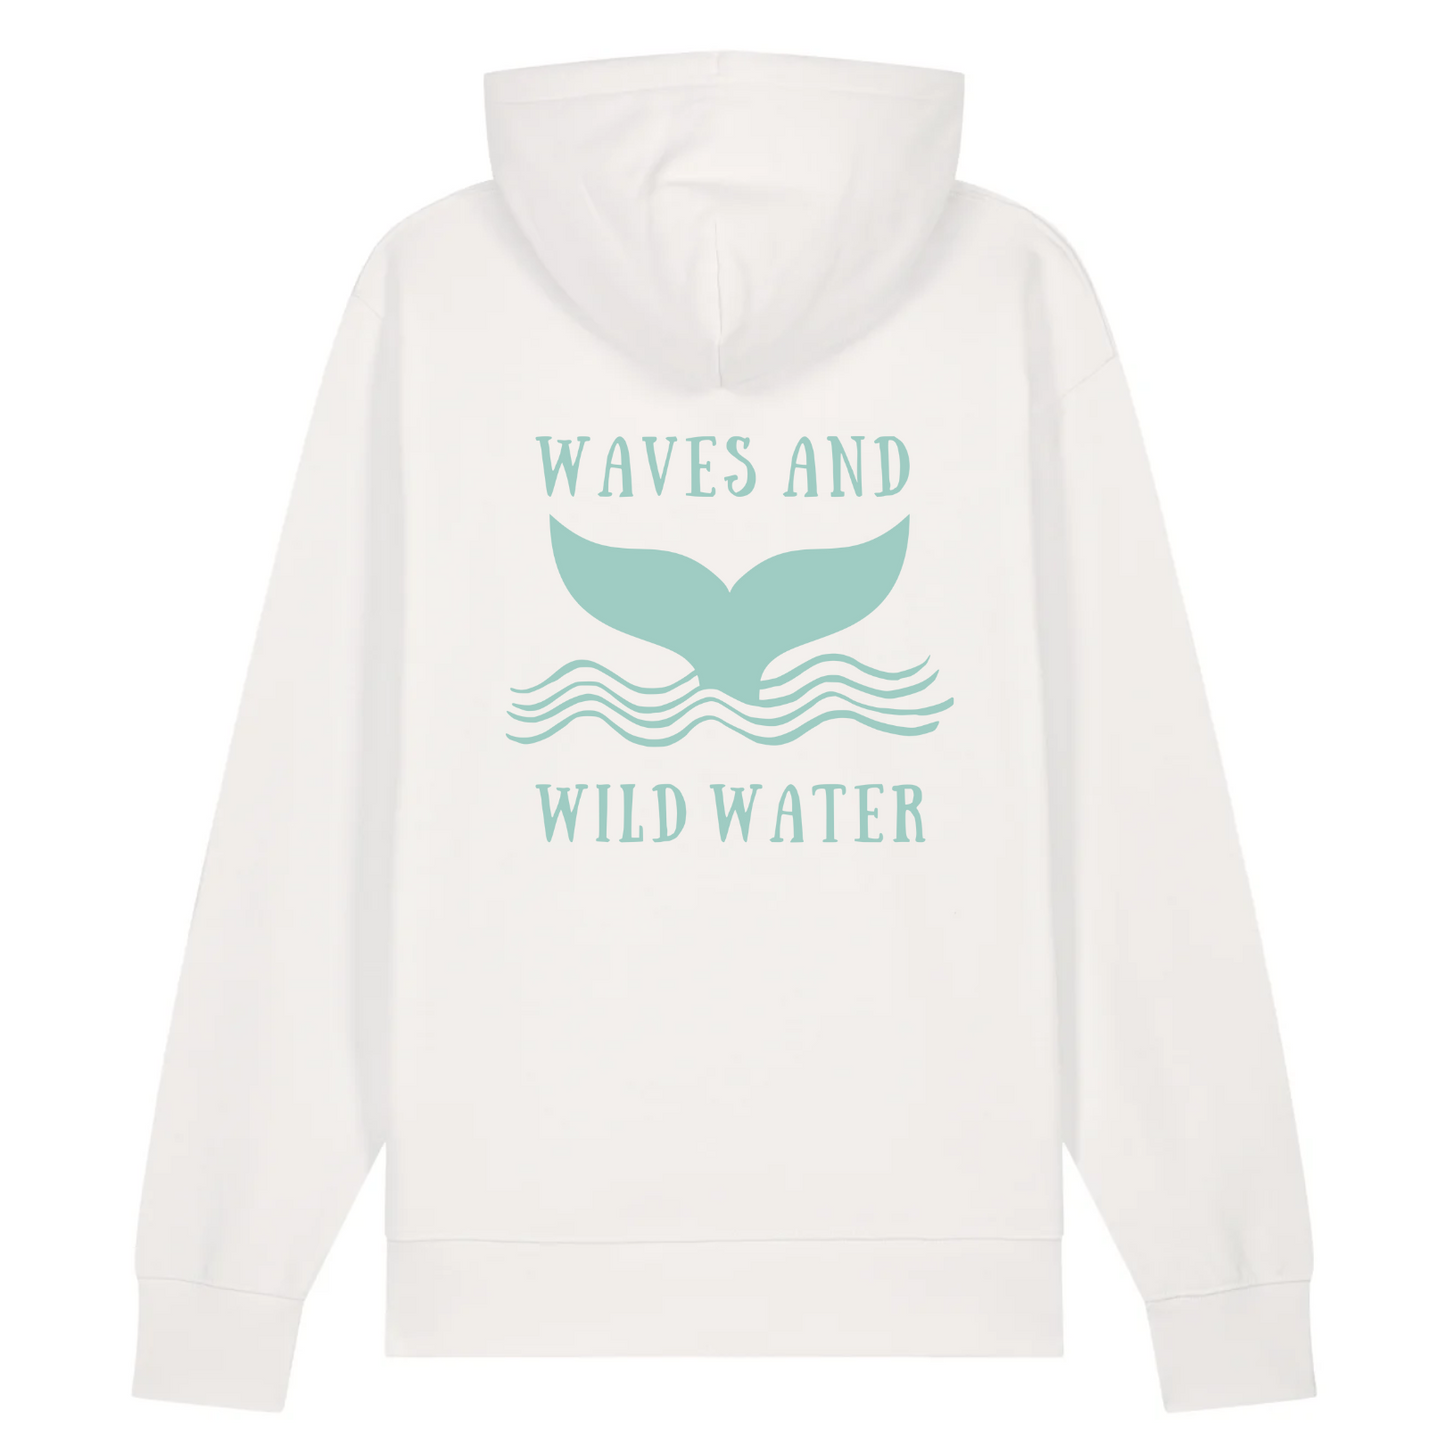 Introducing our natural coloured Beach Hut Hoodie with Waves and Wild Water logo on the back in teal chemical free ink. We just love wearing ours after a cold water dip.